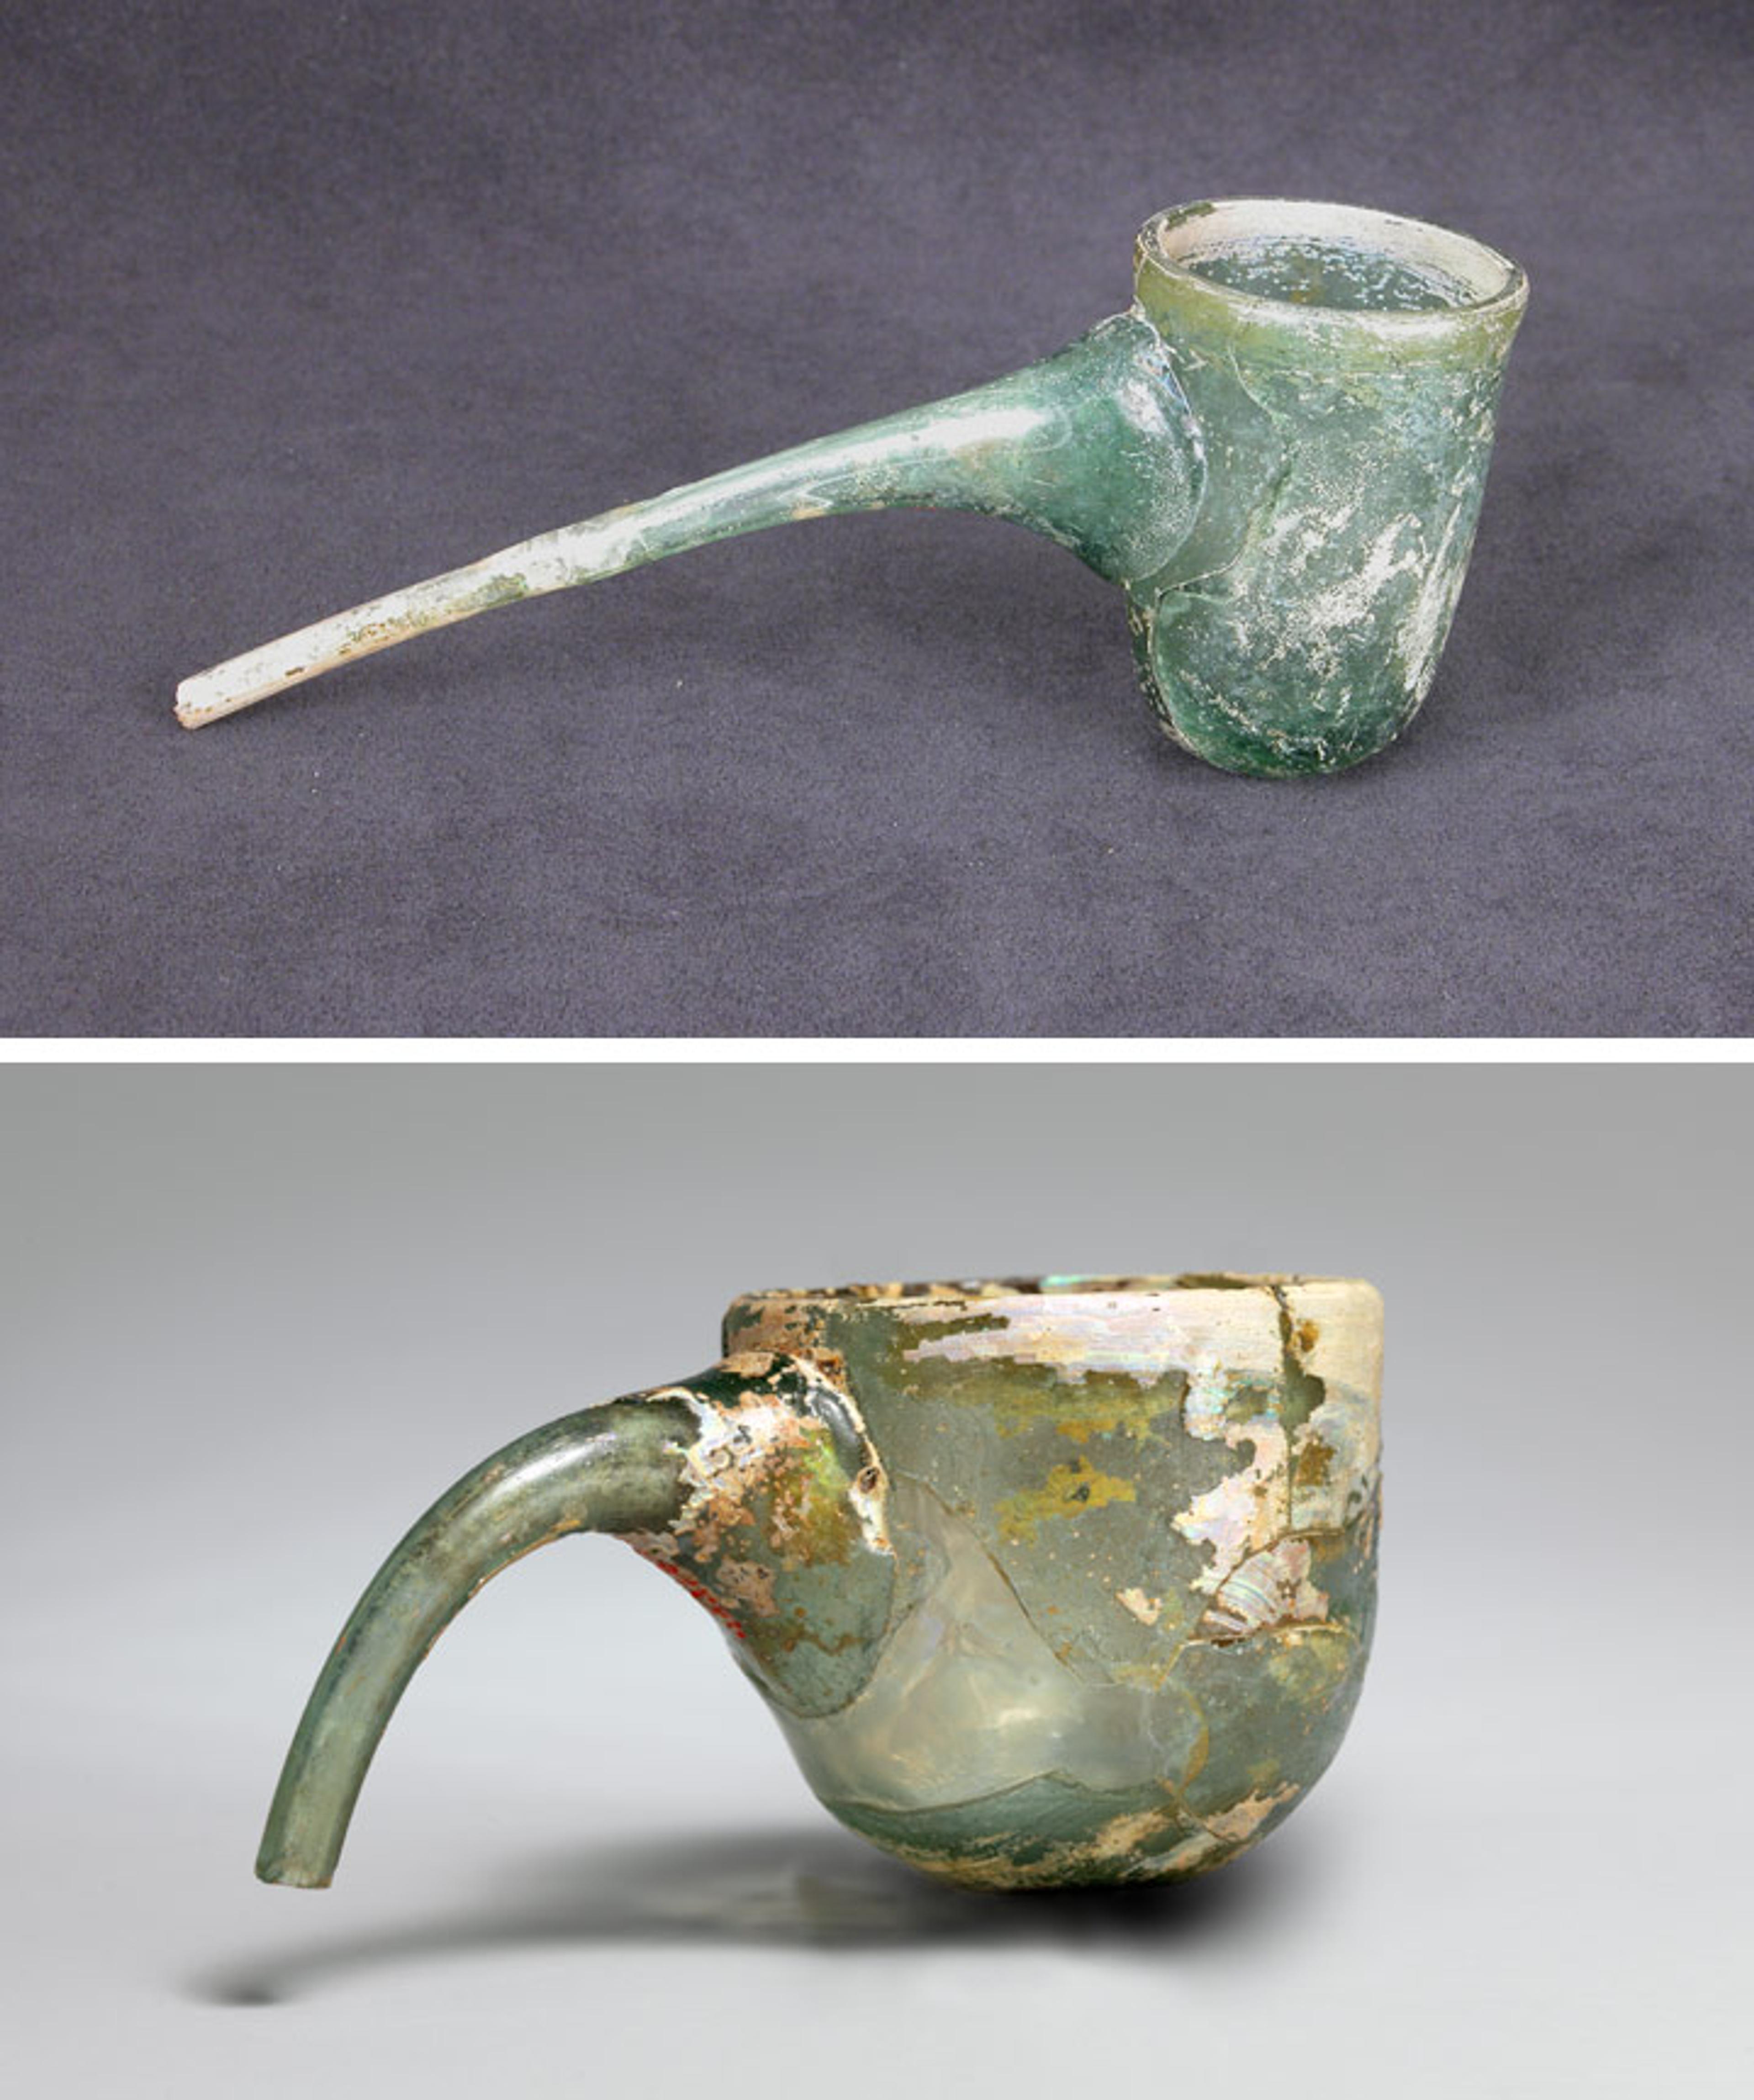 Two glass vessels from 9th- to 11th-century Iran